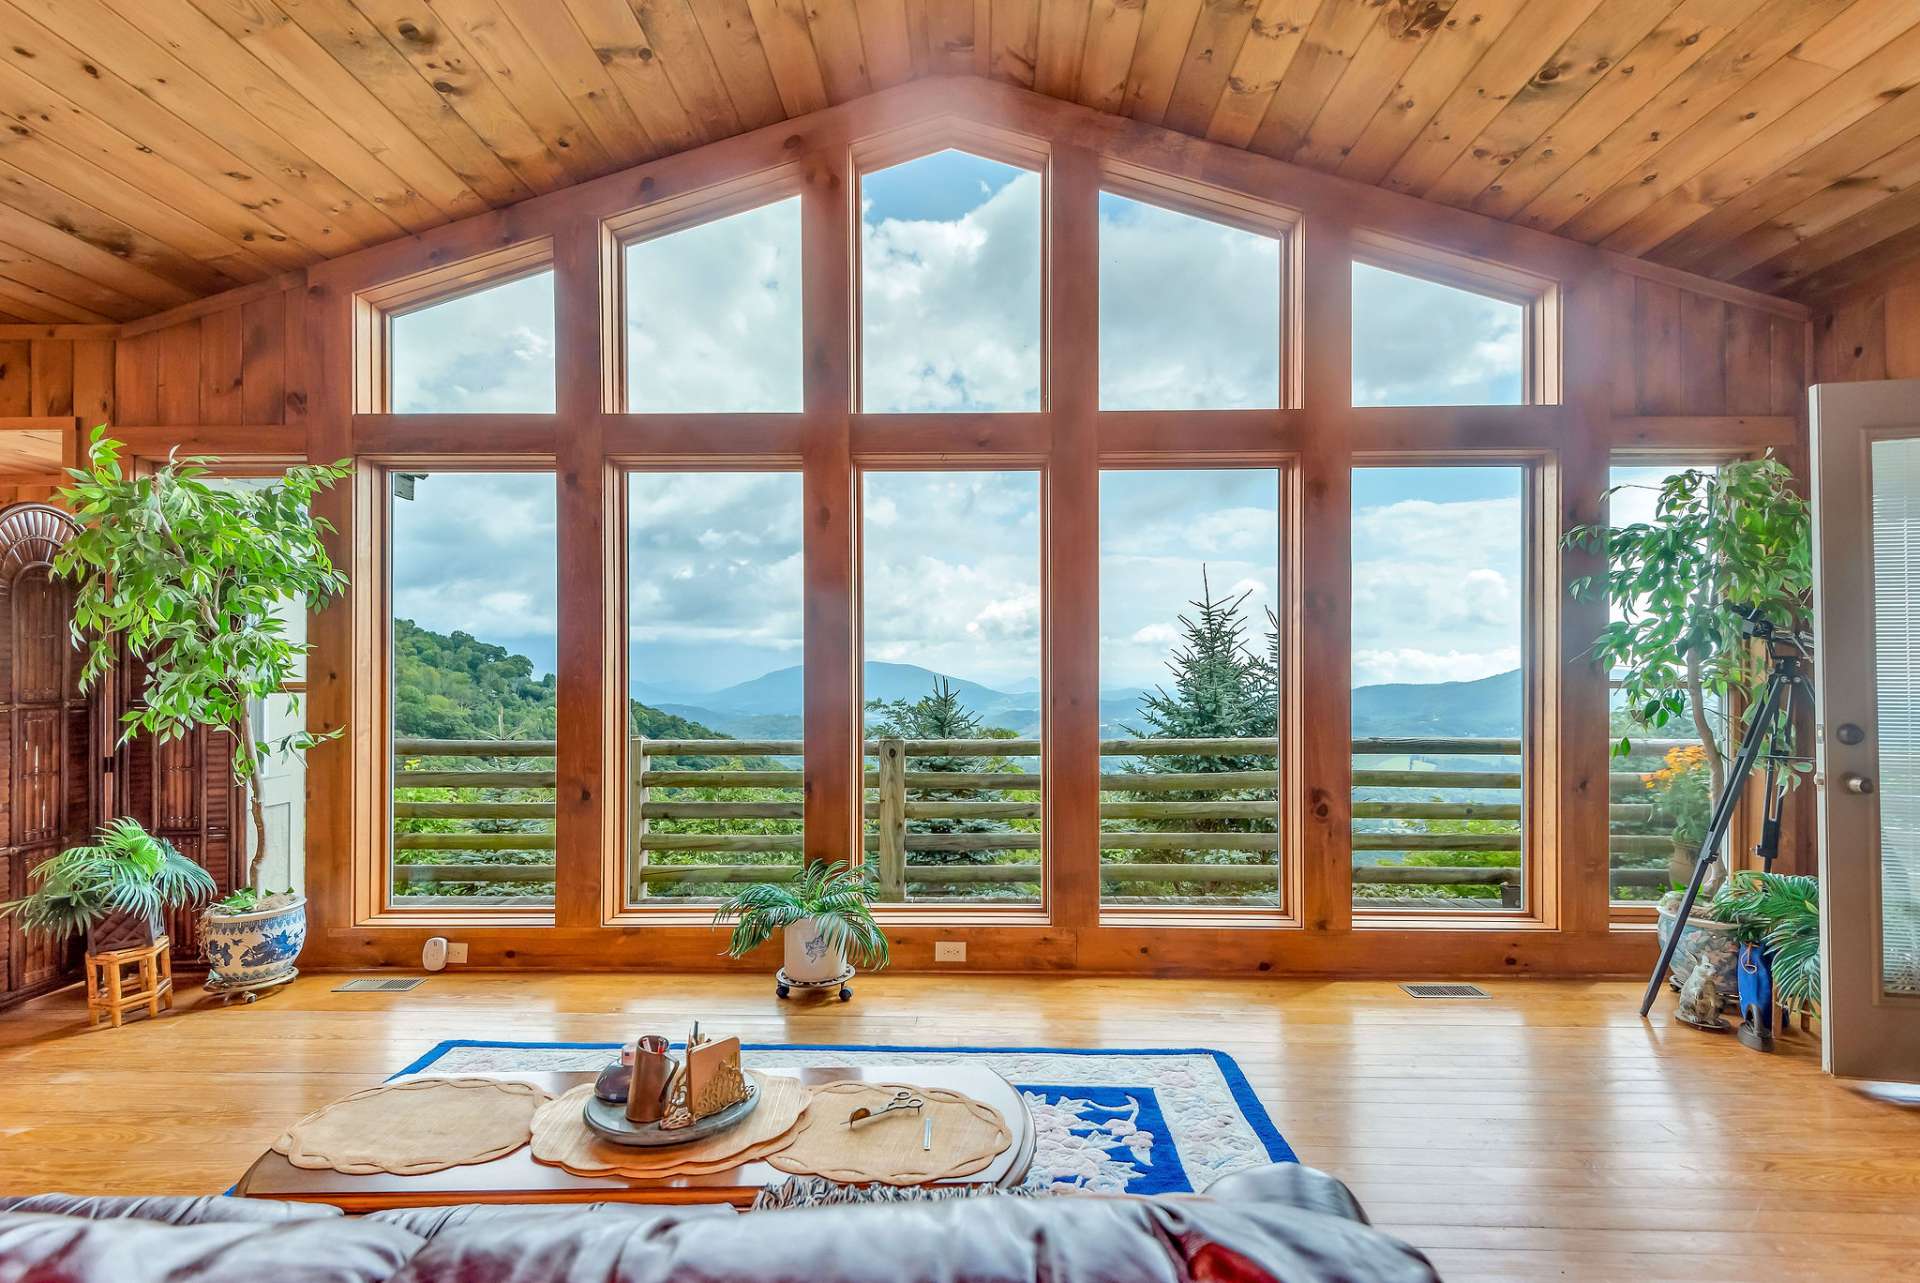 Imagine waking up and seeing the sunrise through this expansive wall of windows every morning!